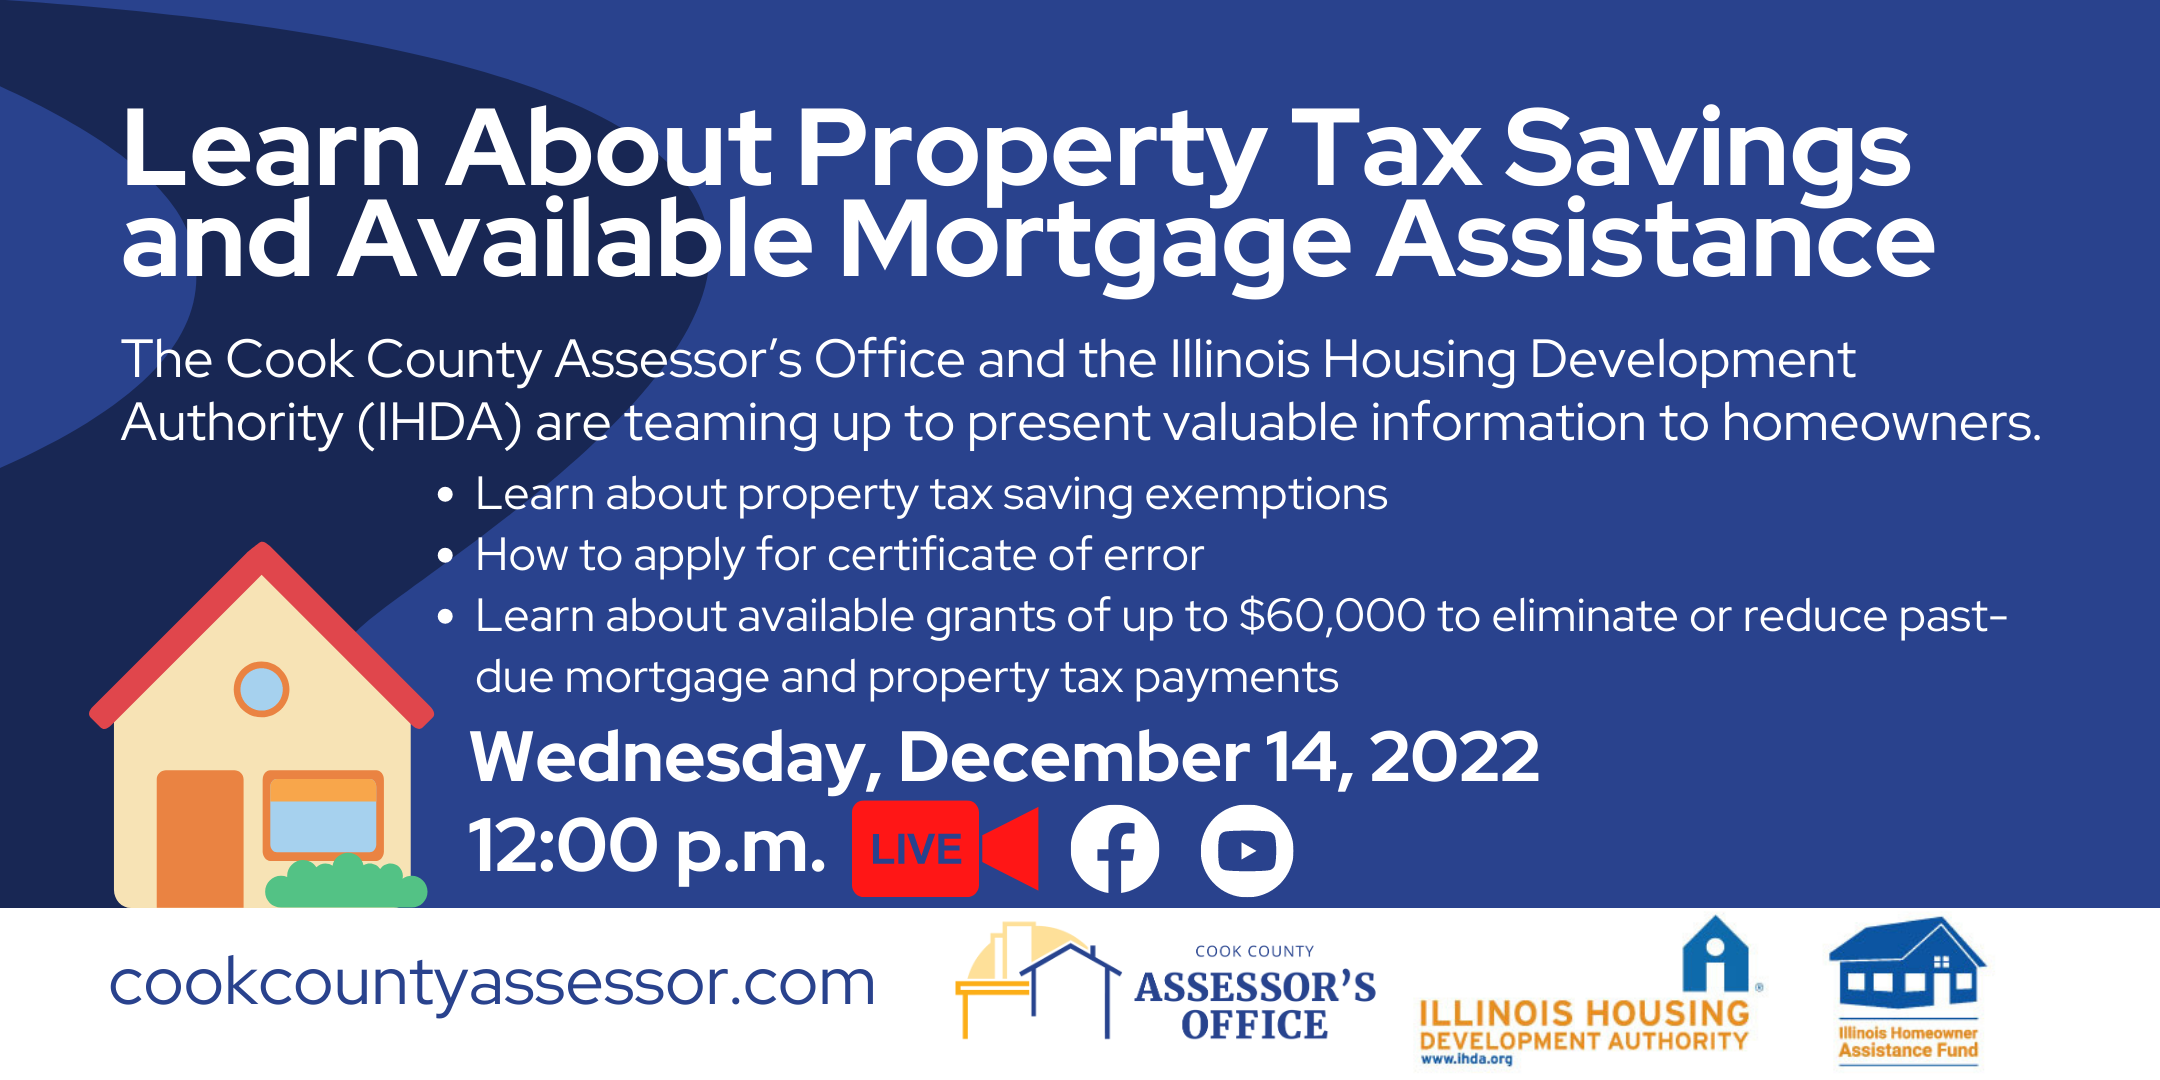 Learn About Property Tax Savings and Available Mortgage Assistance